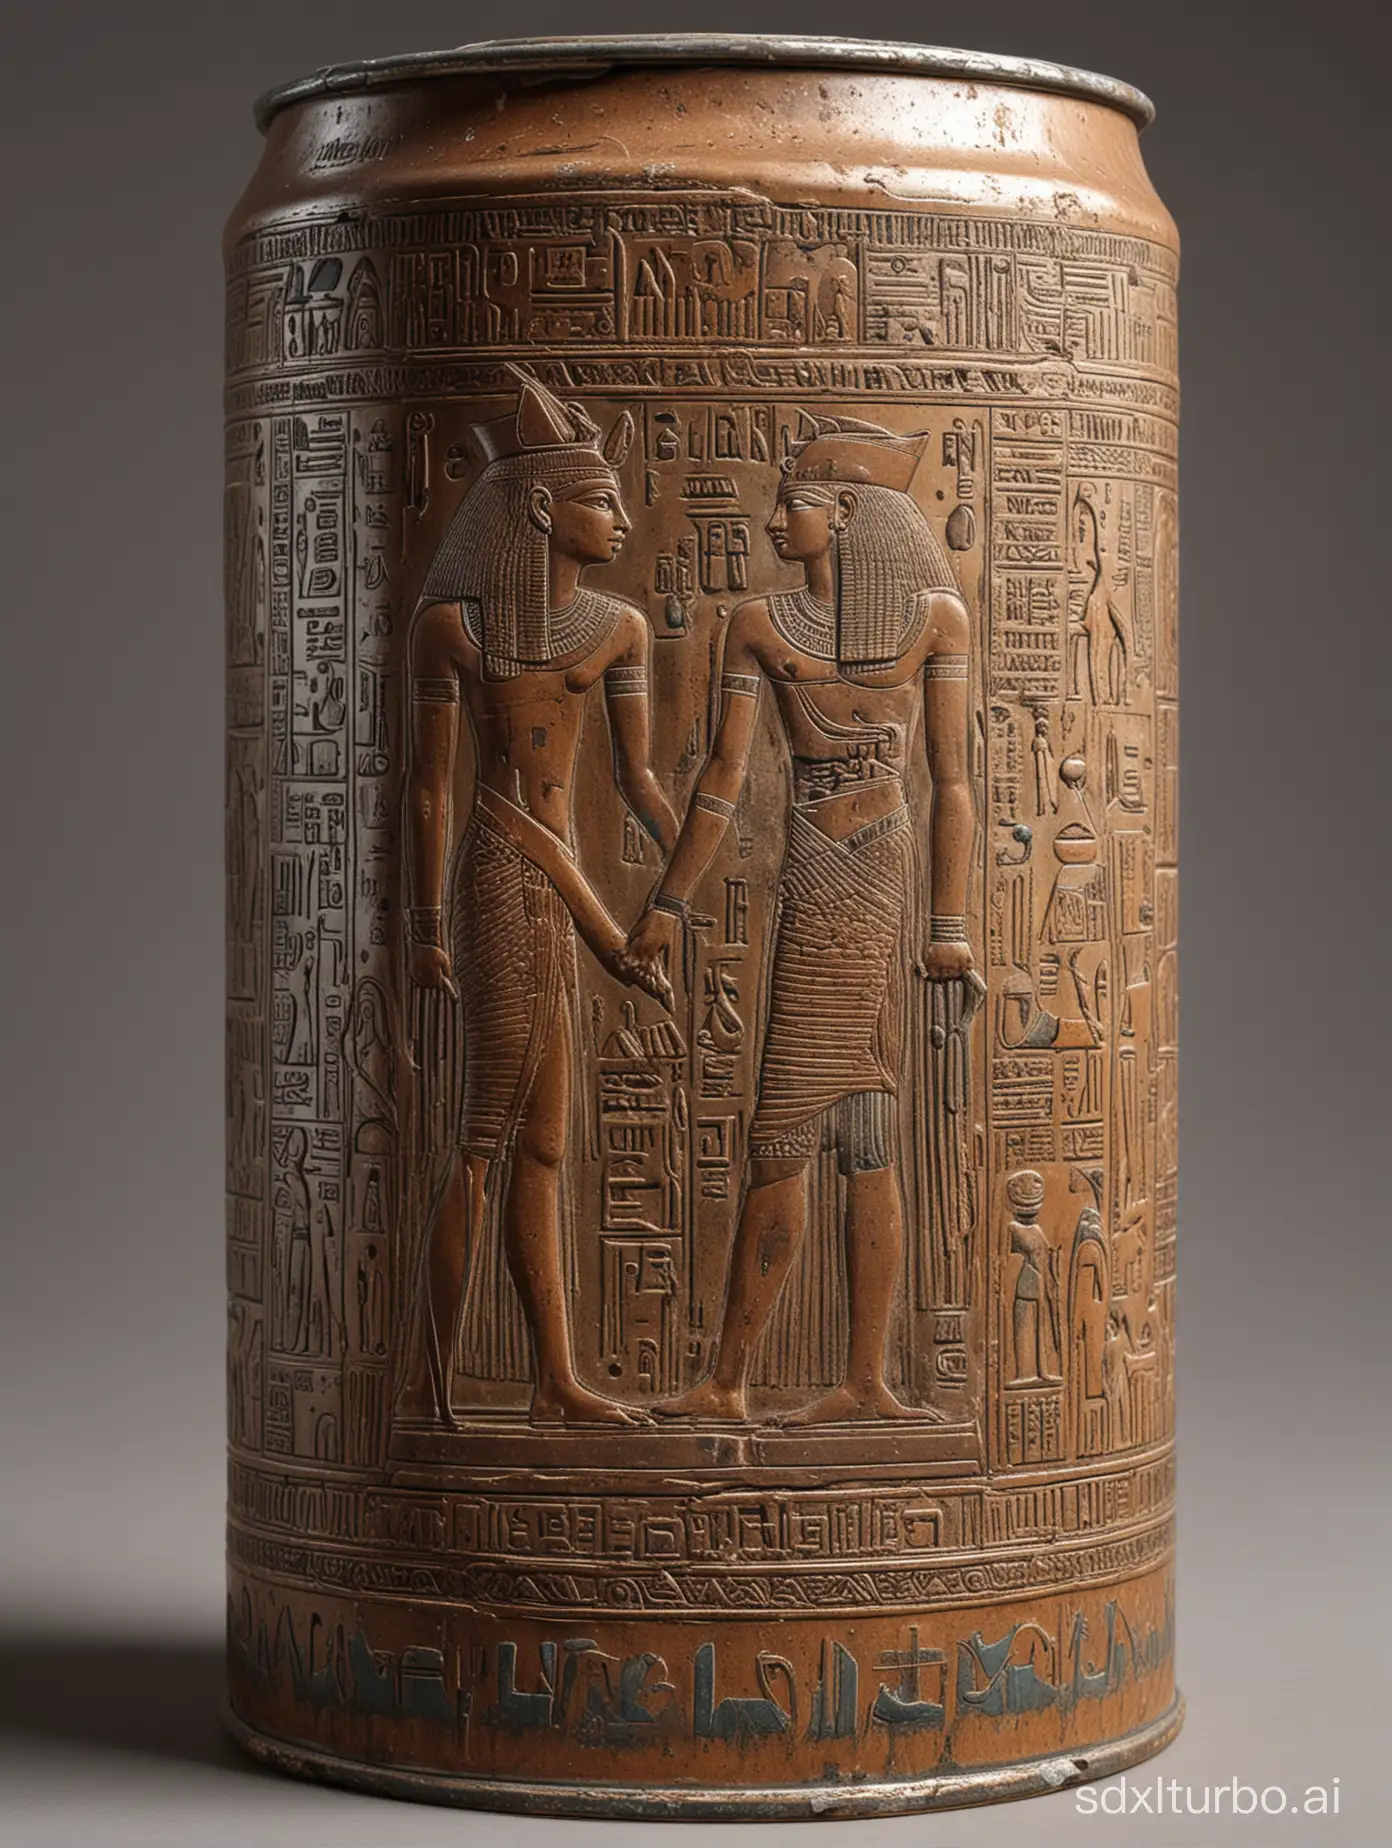 generate a rusty metal can with intricate designs and engravings that combine elements of ancient Egyptian art and modern design. A prominent feature on the can is an embossed figure that resembles an Egyptian pharaoh wearing a traditional headdress but is depicted riding a modern scooter. Hieroglyphic-like symbols and shapes are engraved above and around the figure, adding to the ancient aesthetic. The top of the can has a typical soda or beer can opening, contrasting with the otherwise historical appearance. The metal shows signs of wear and tarnish, giving it an aged look.white background